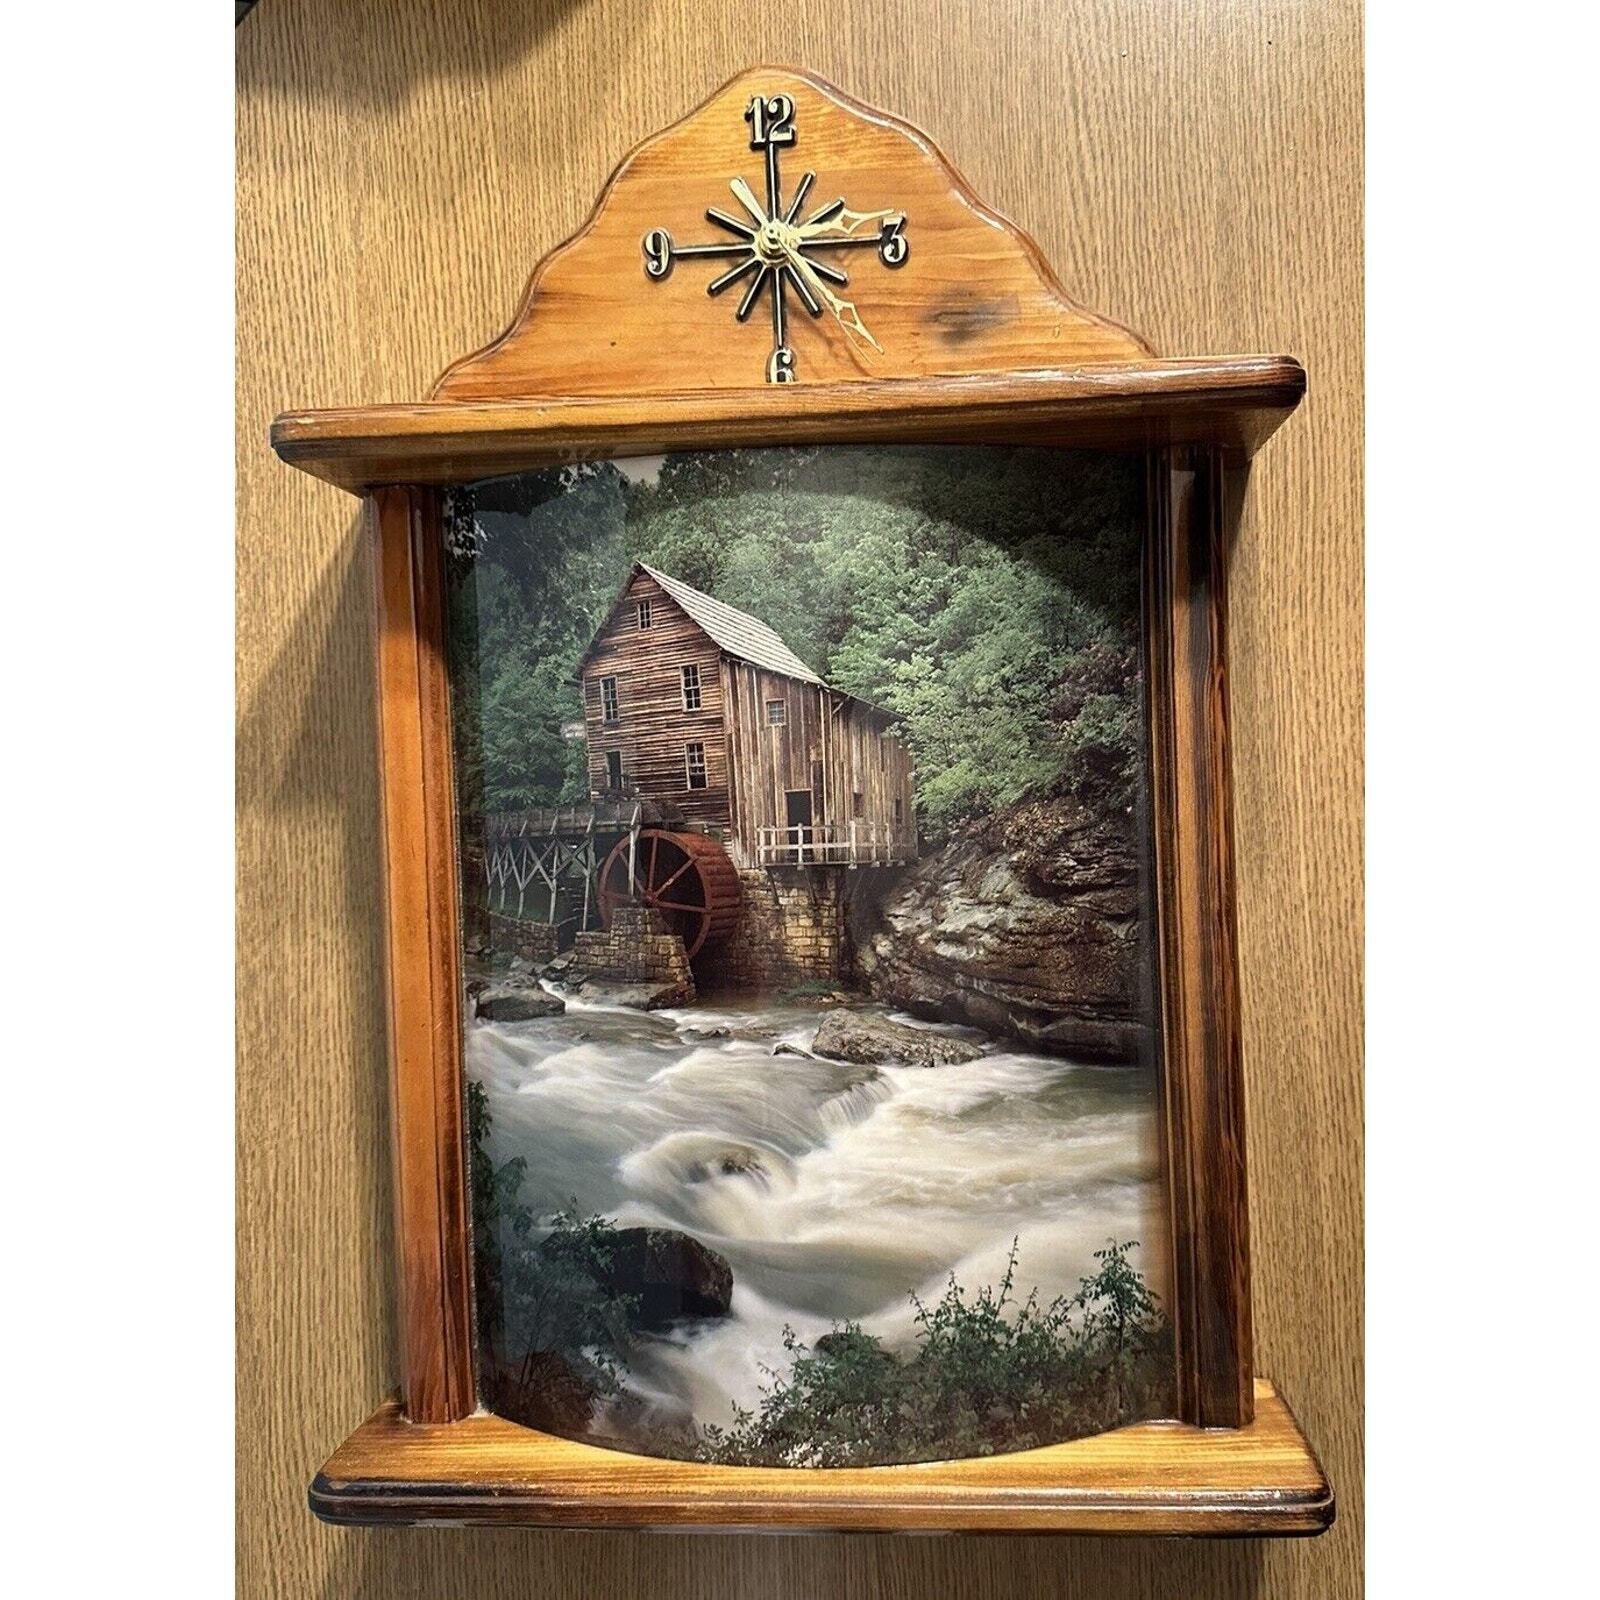 Vintage Wall Clock With Curved Scenic River Picture- Tested And Works